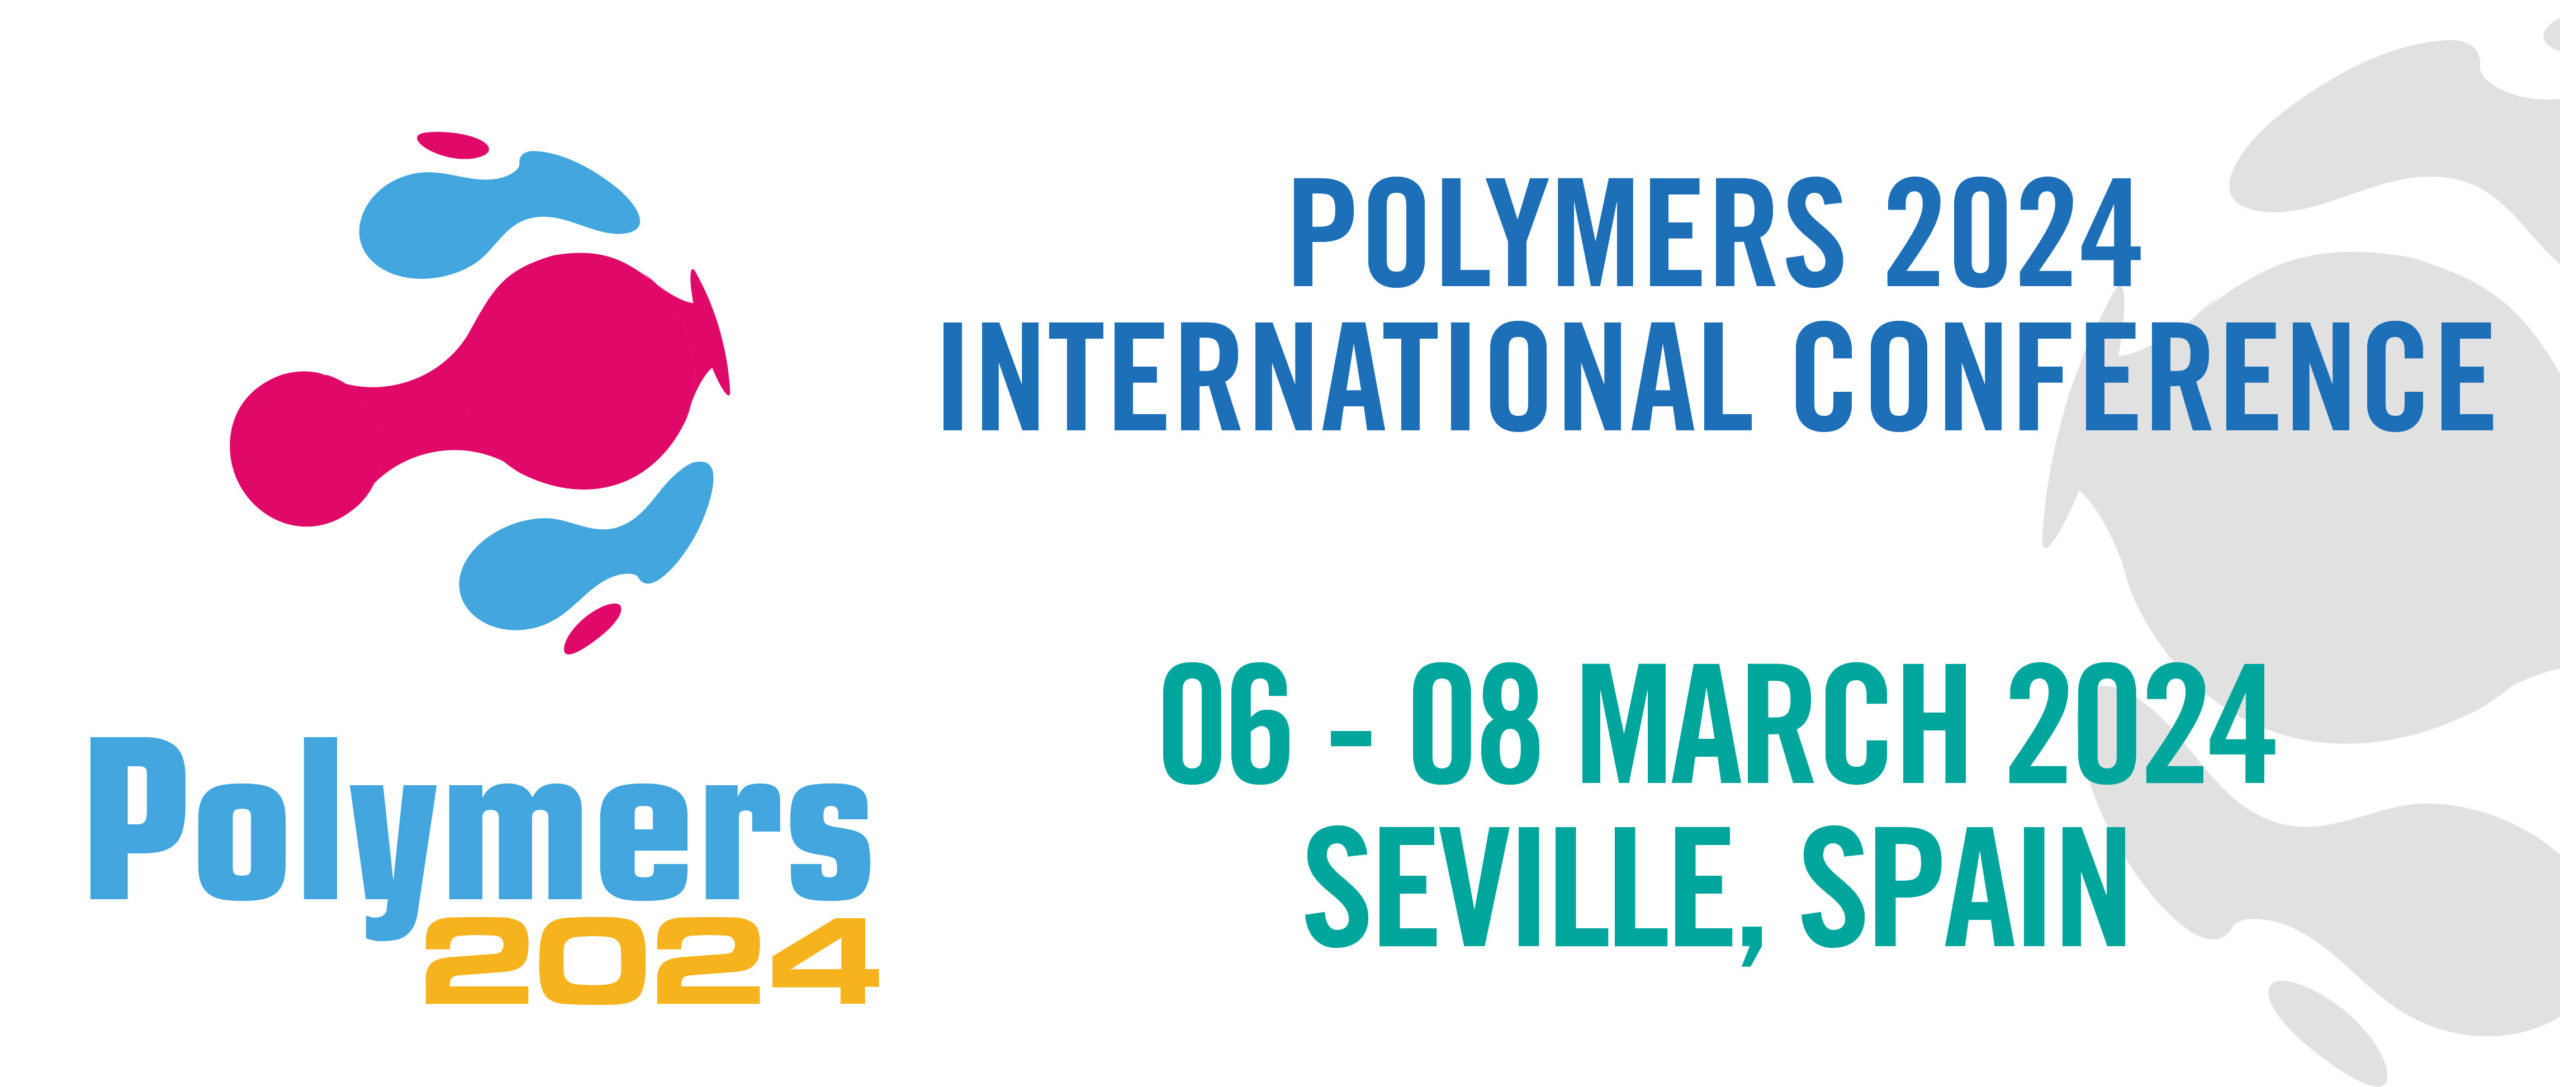 Polymers international conference